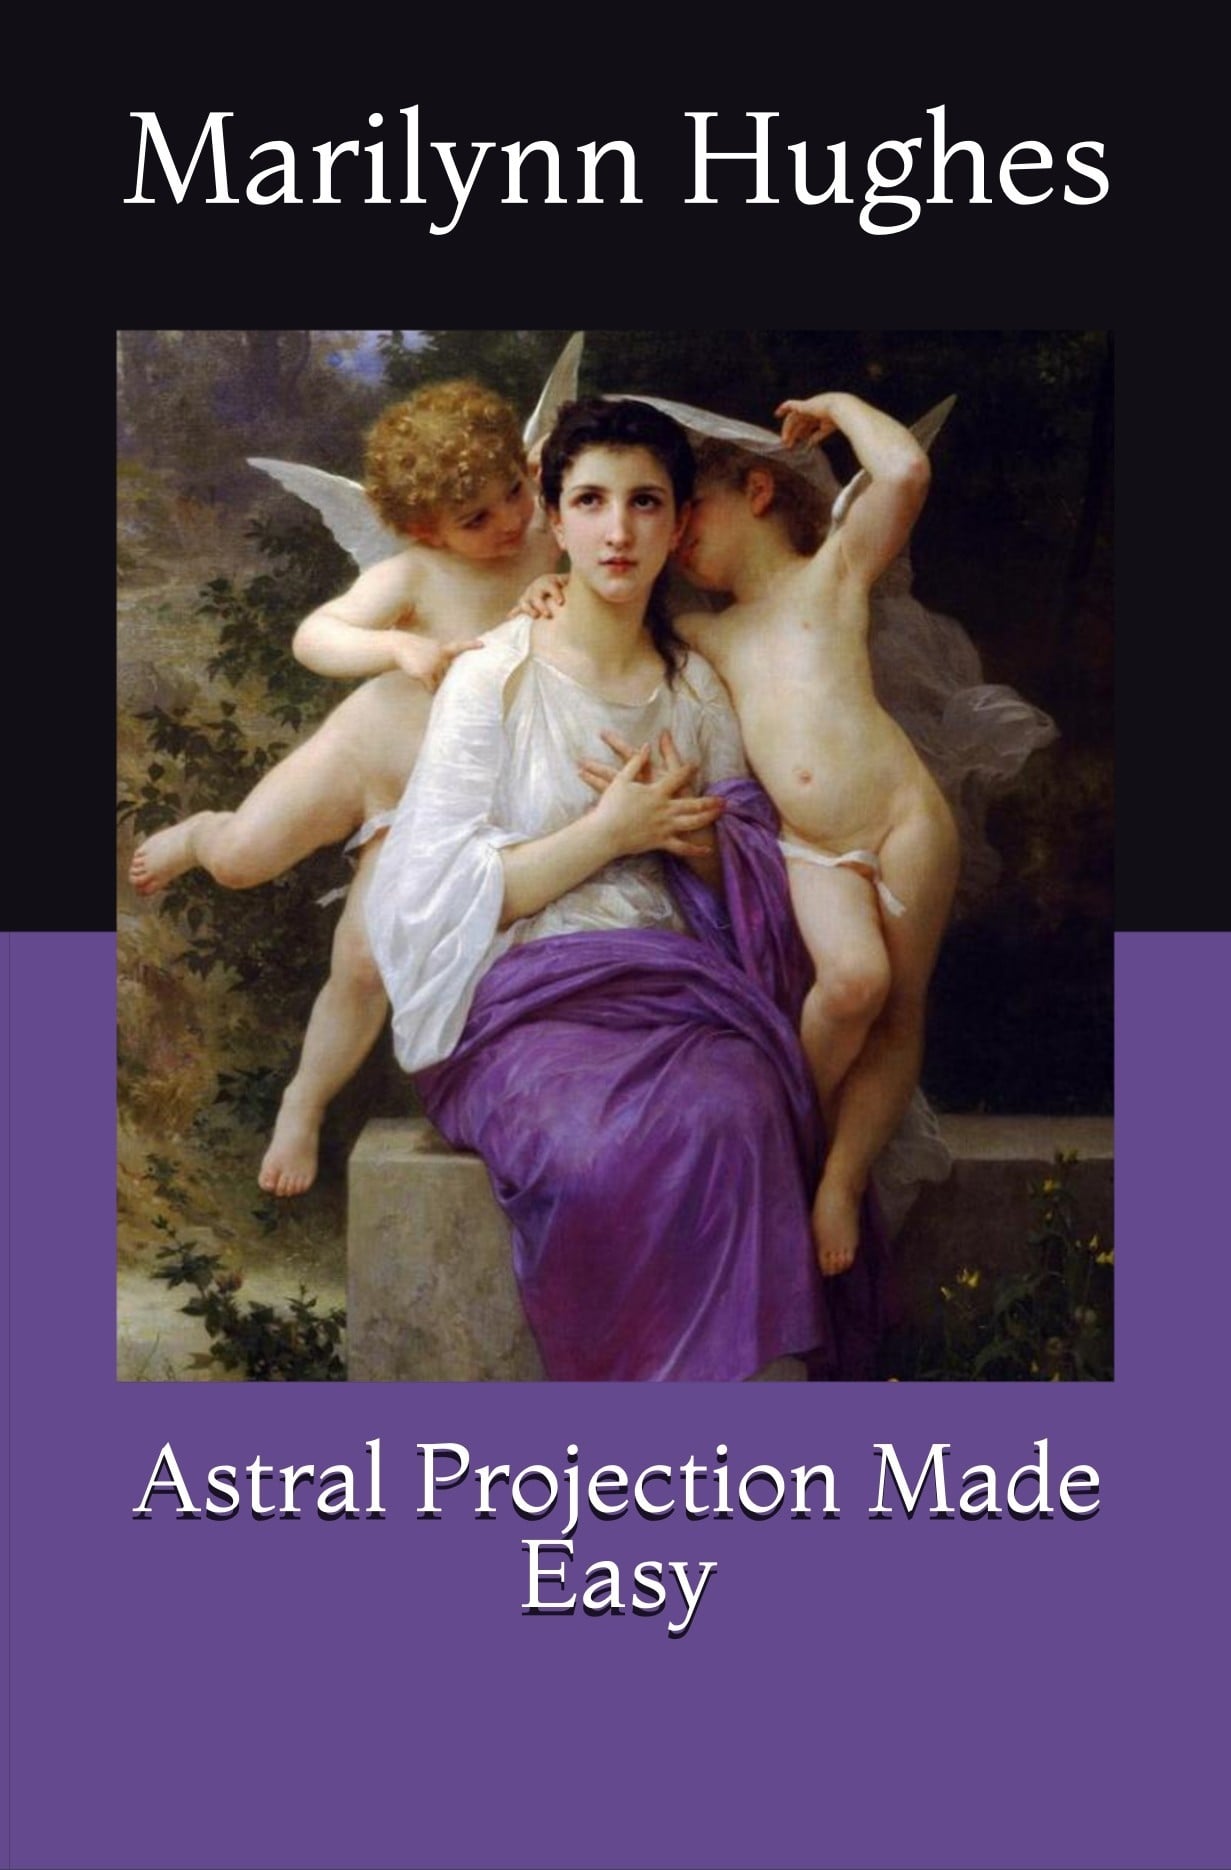 Meditations and Affirmations for your Astral Projection Practice. Use each page as a daily affirmation towards your practice of astral projection. 